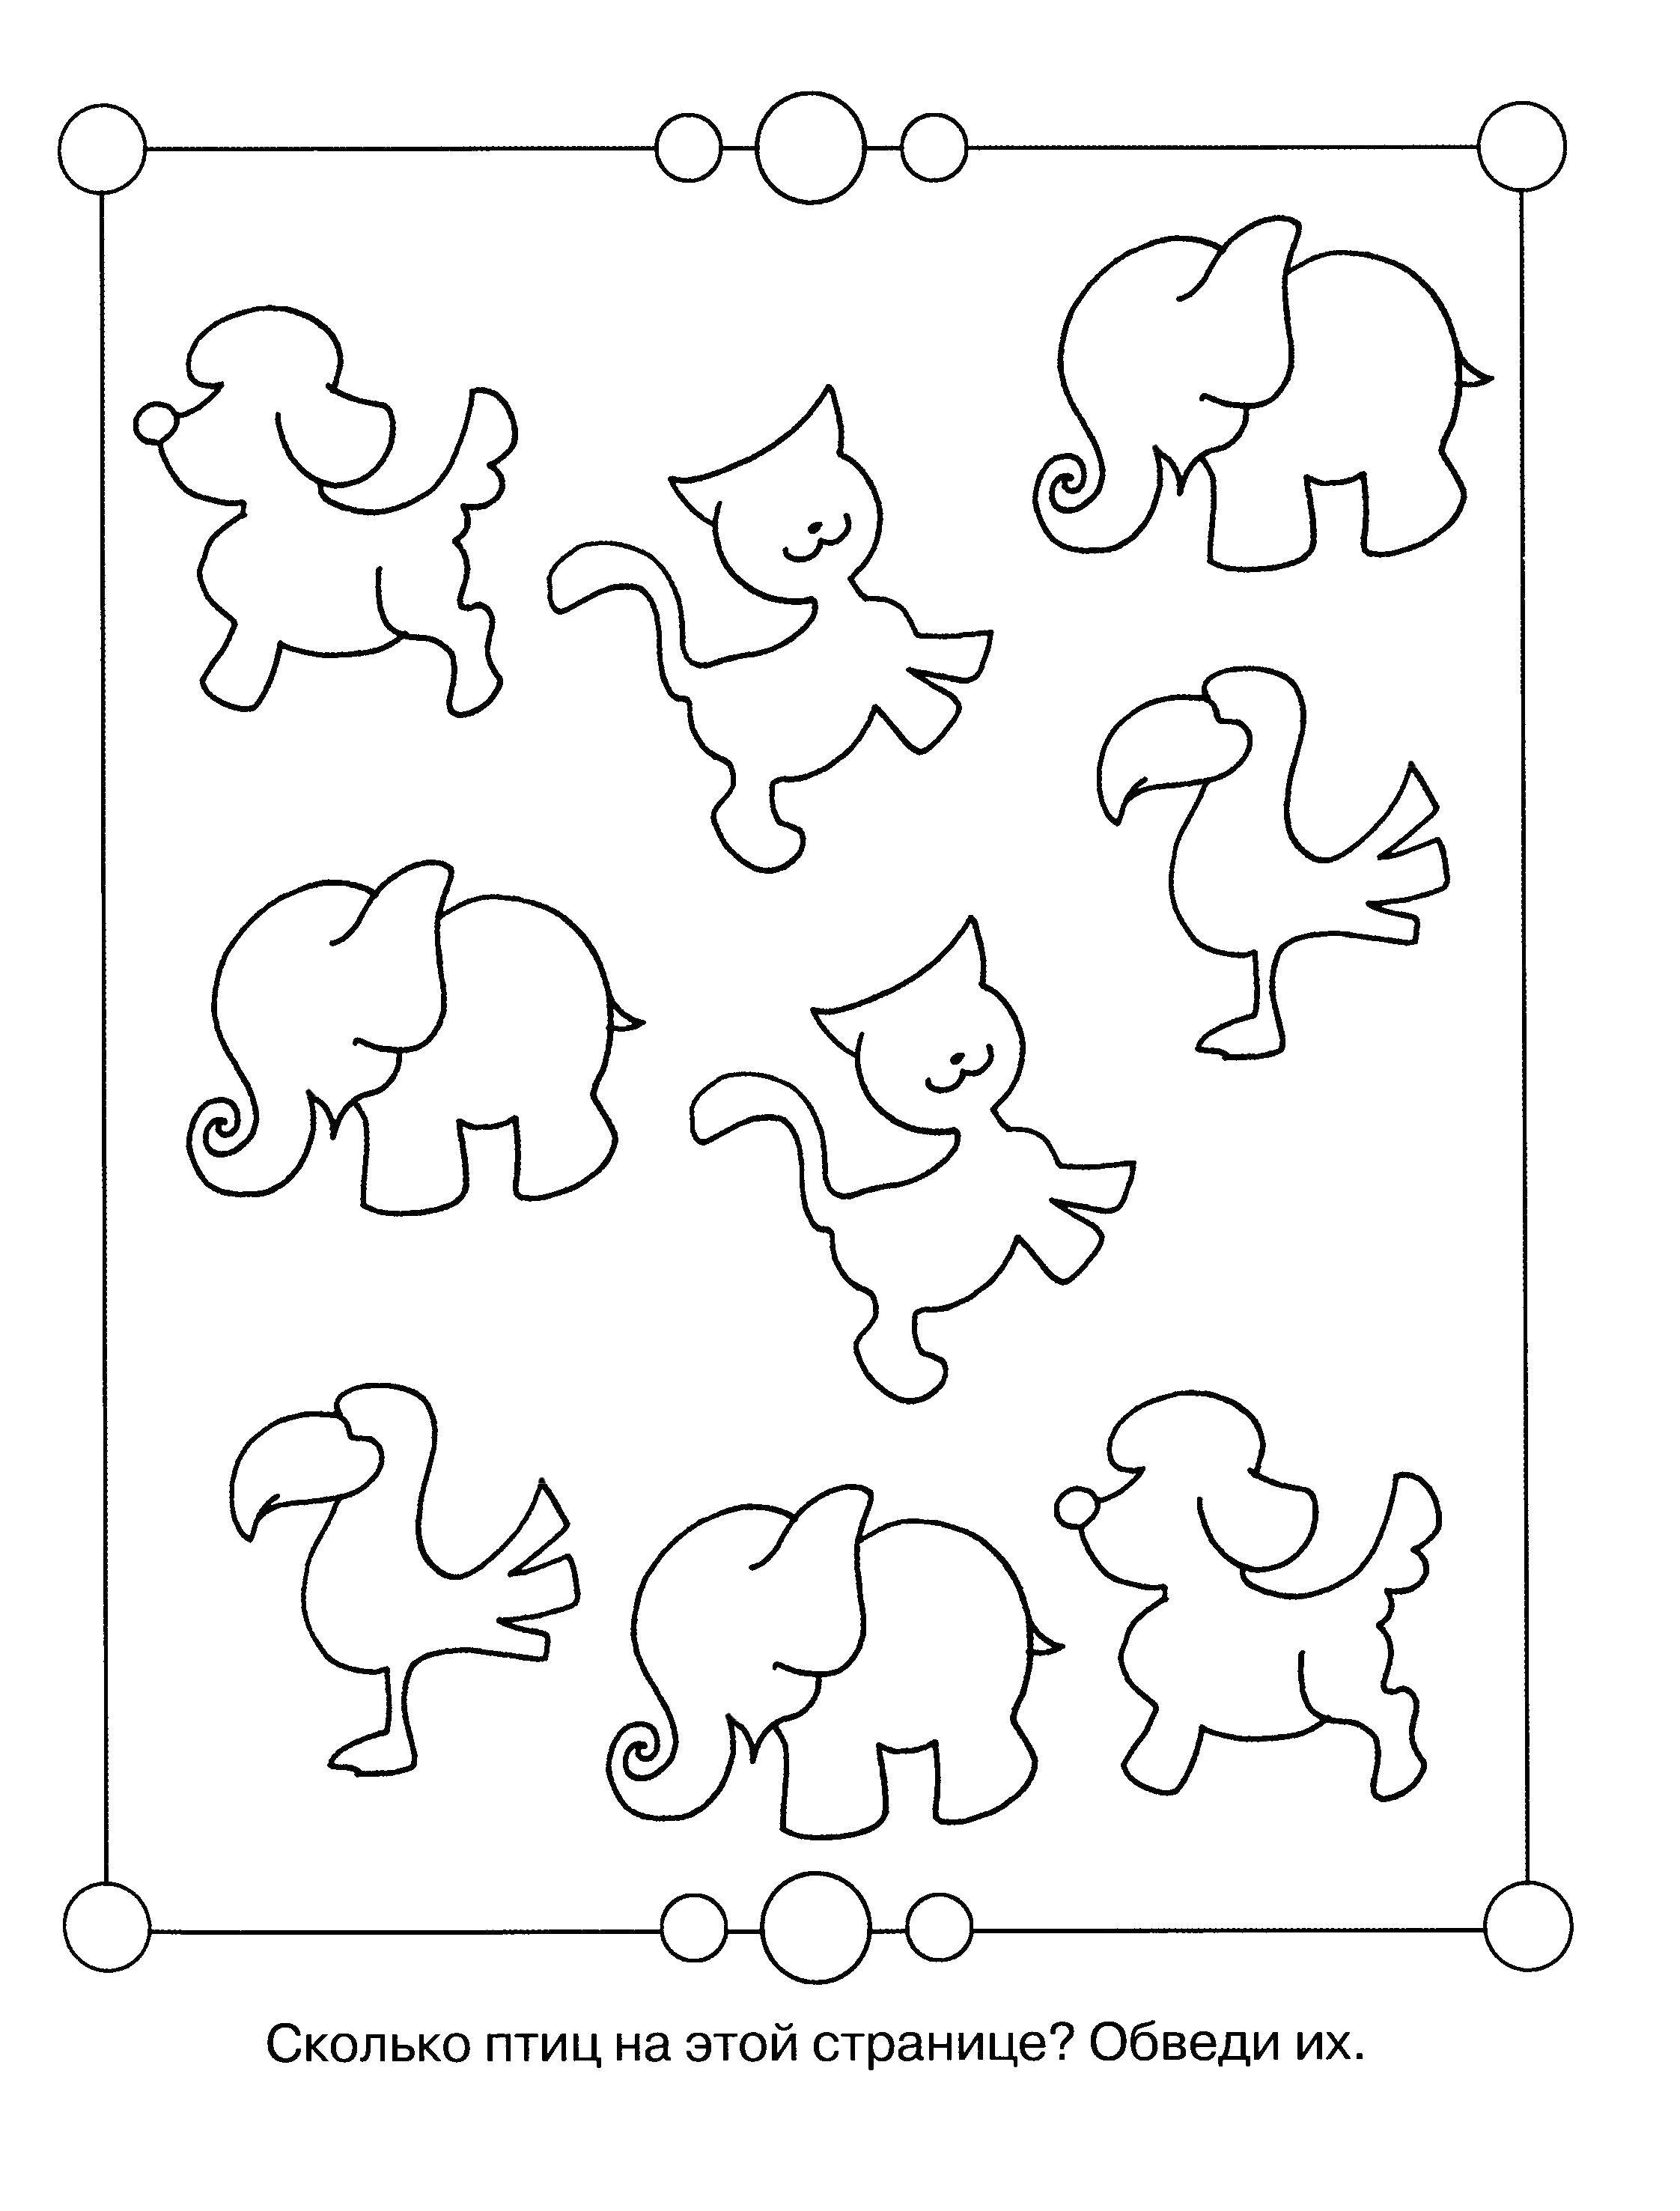 Coloring Find a pair of each animal. Category riddles for kids. Tags:  Teaching coloring, logic.